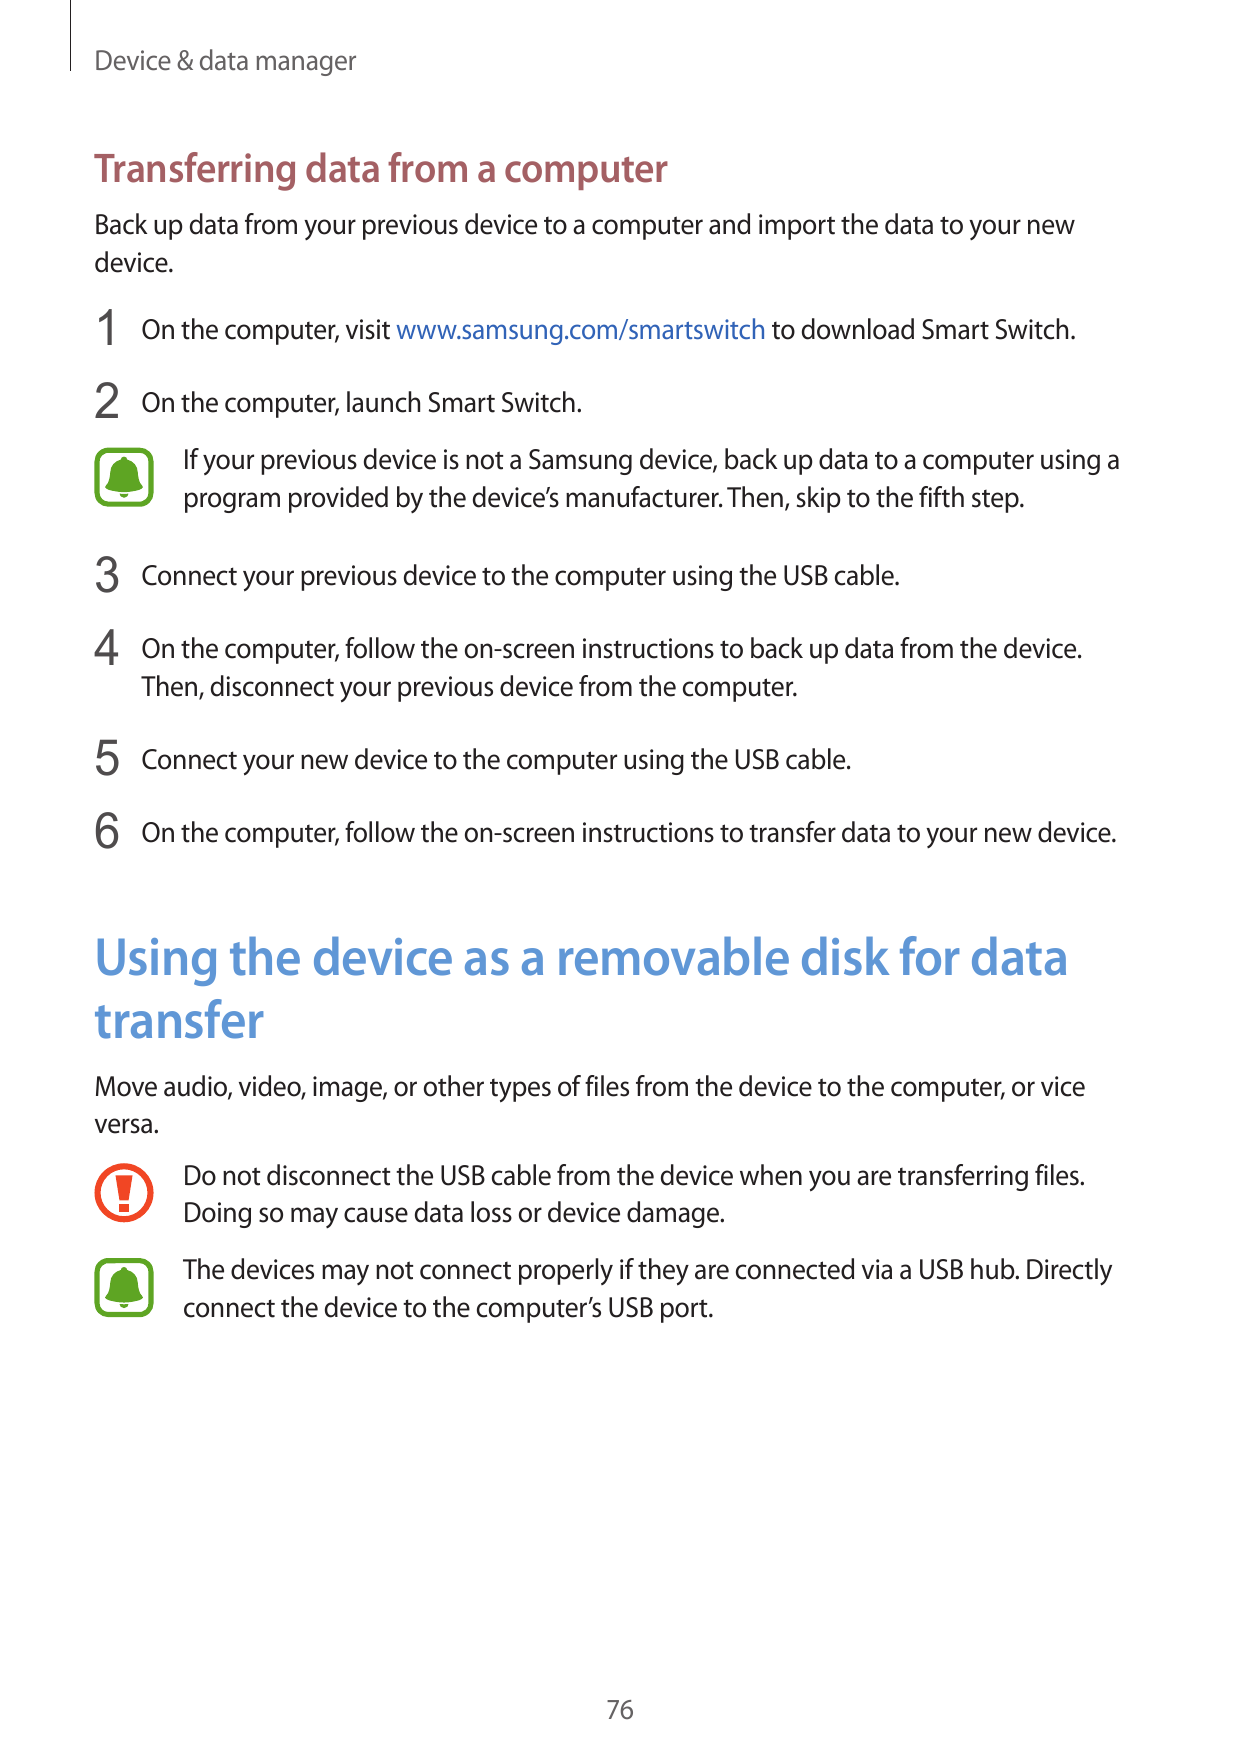 Device & data managerTransferring data from a computerBack up data from your previous device to a computer and import the data t